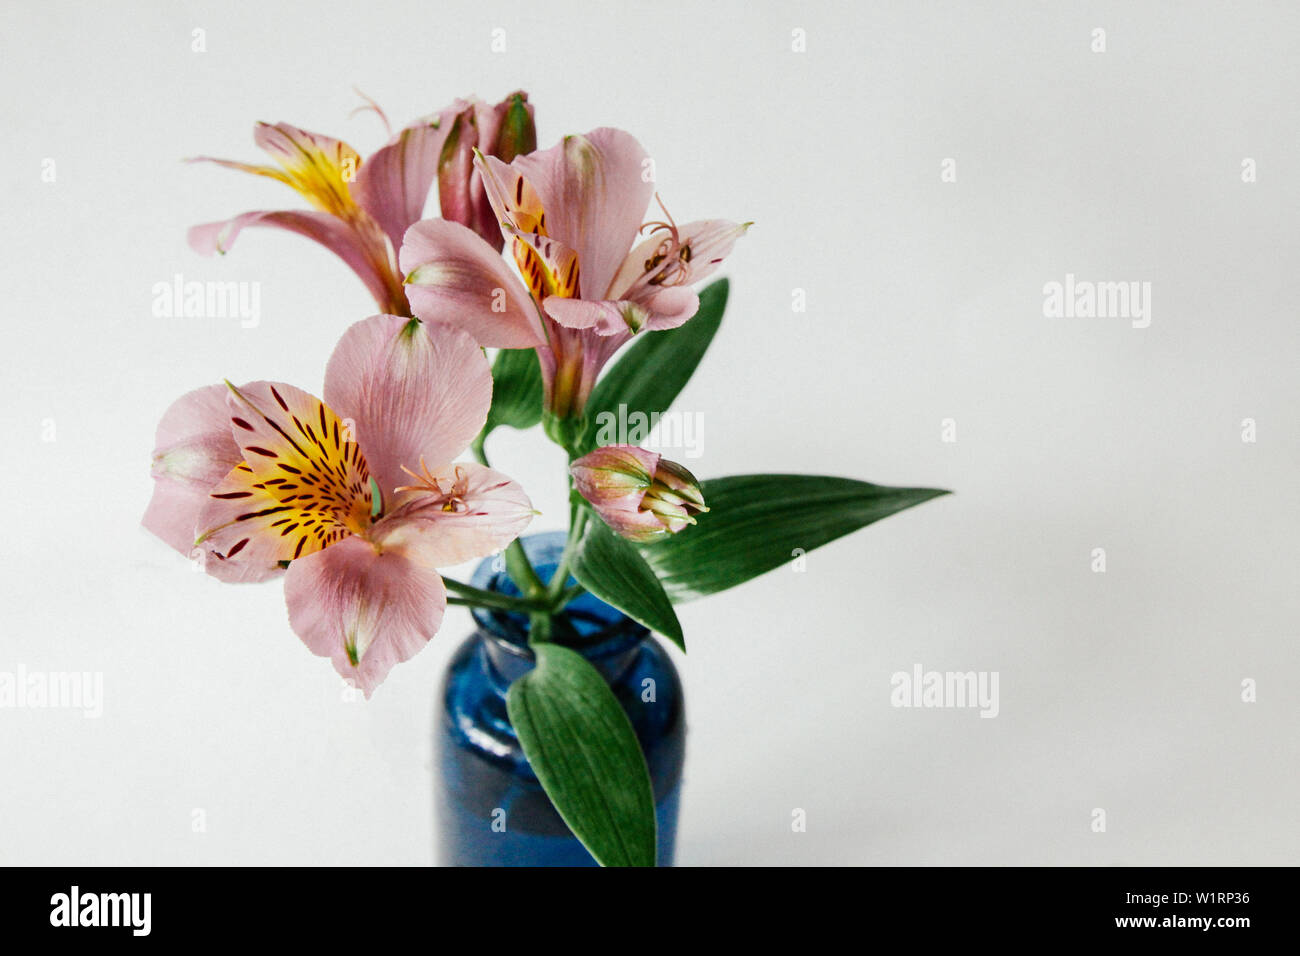 Tall red alstroemeria in glass blue vase on with white background. A small and elegant bouquet. Stock Photo